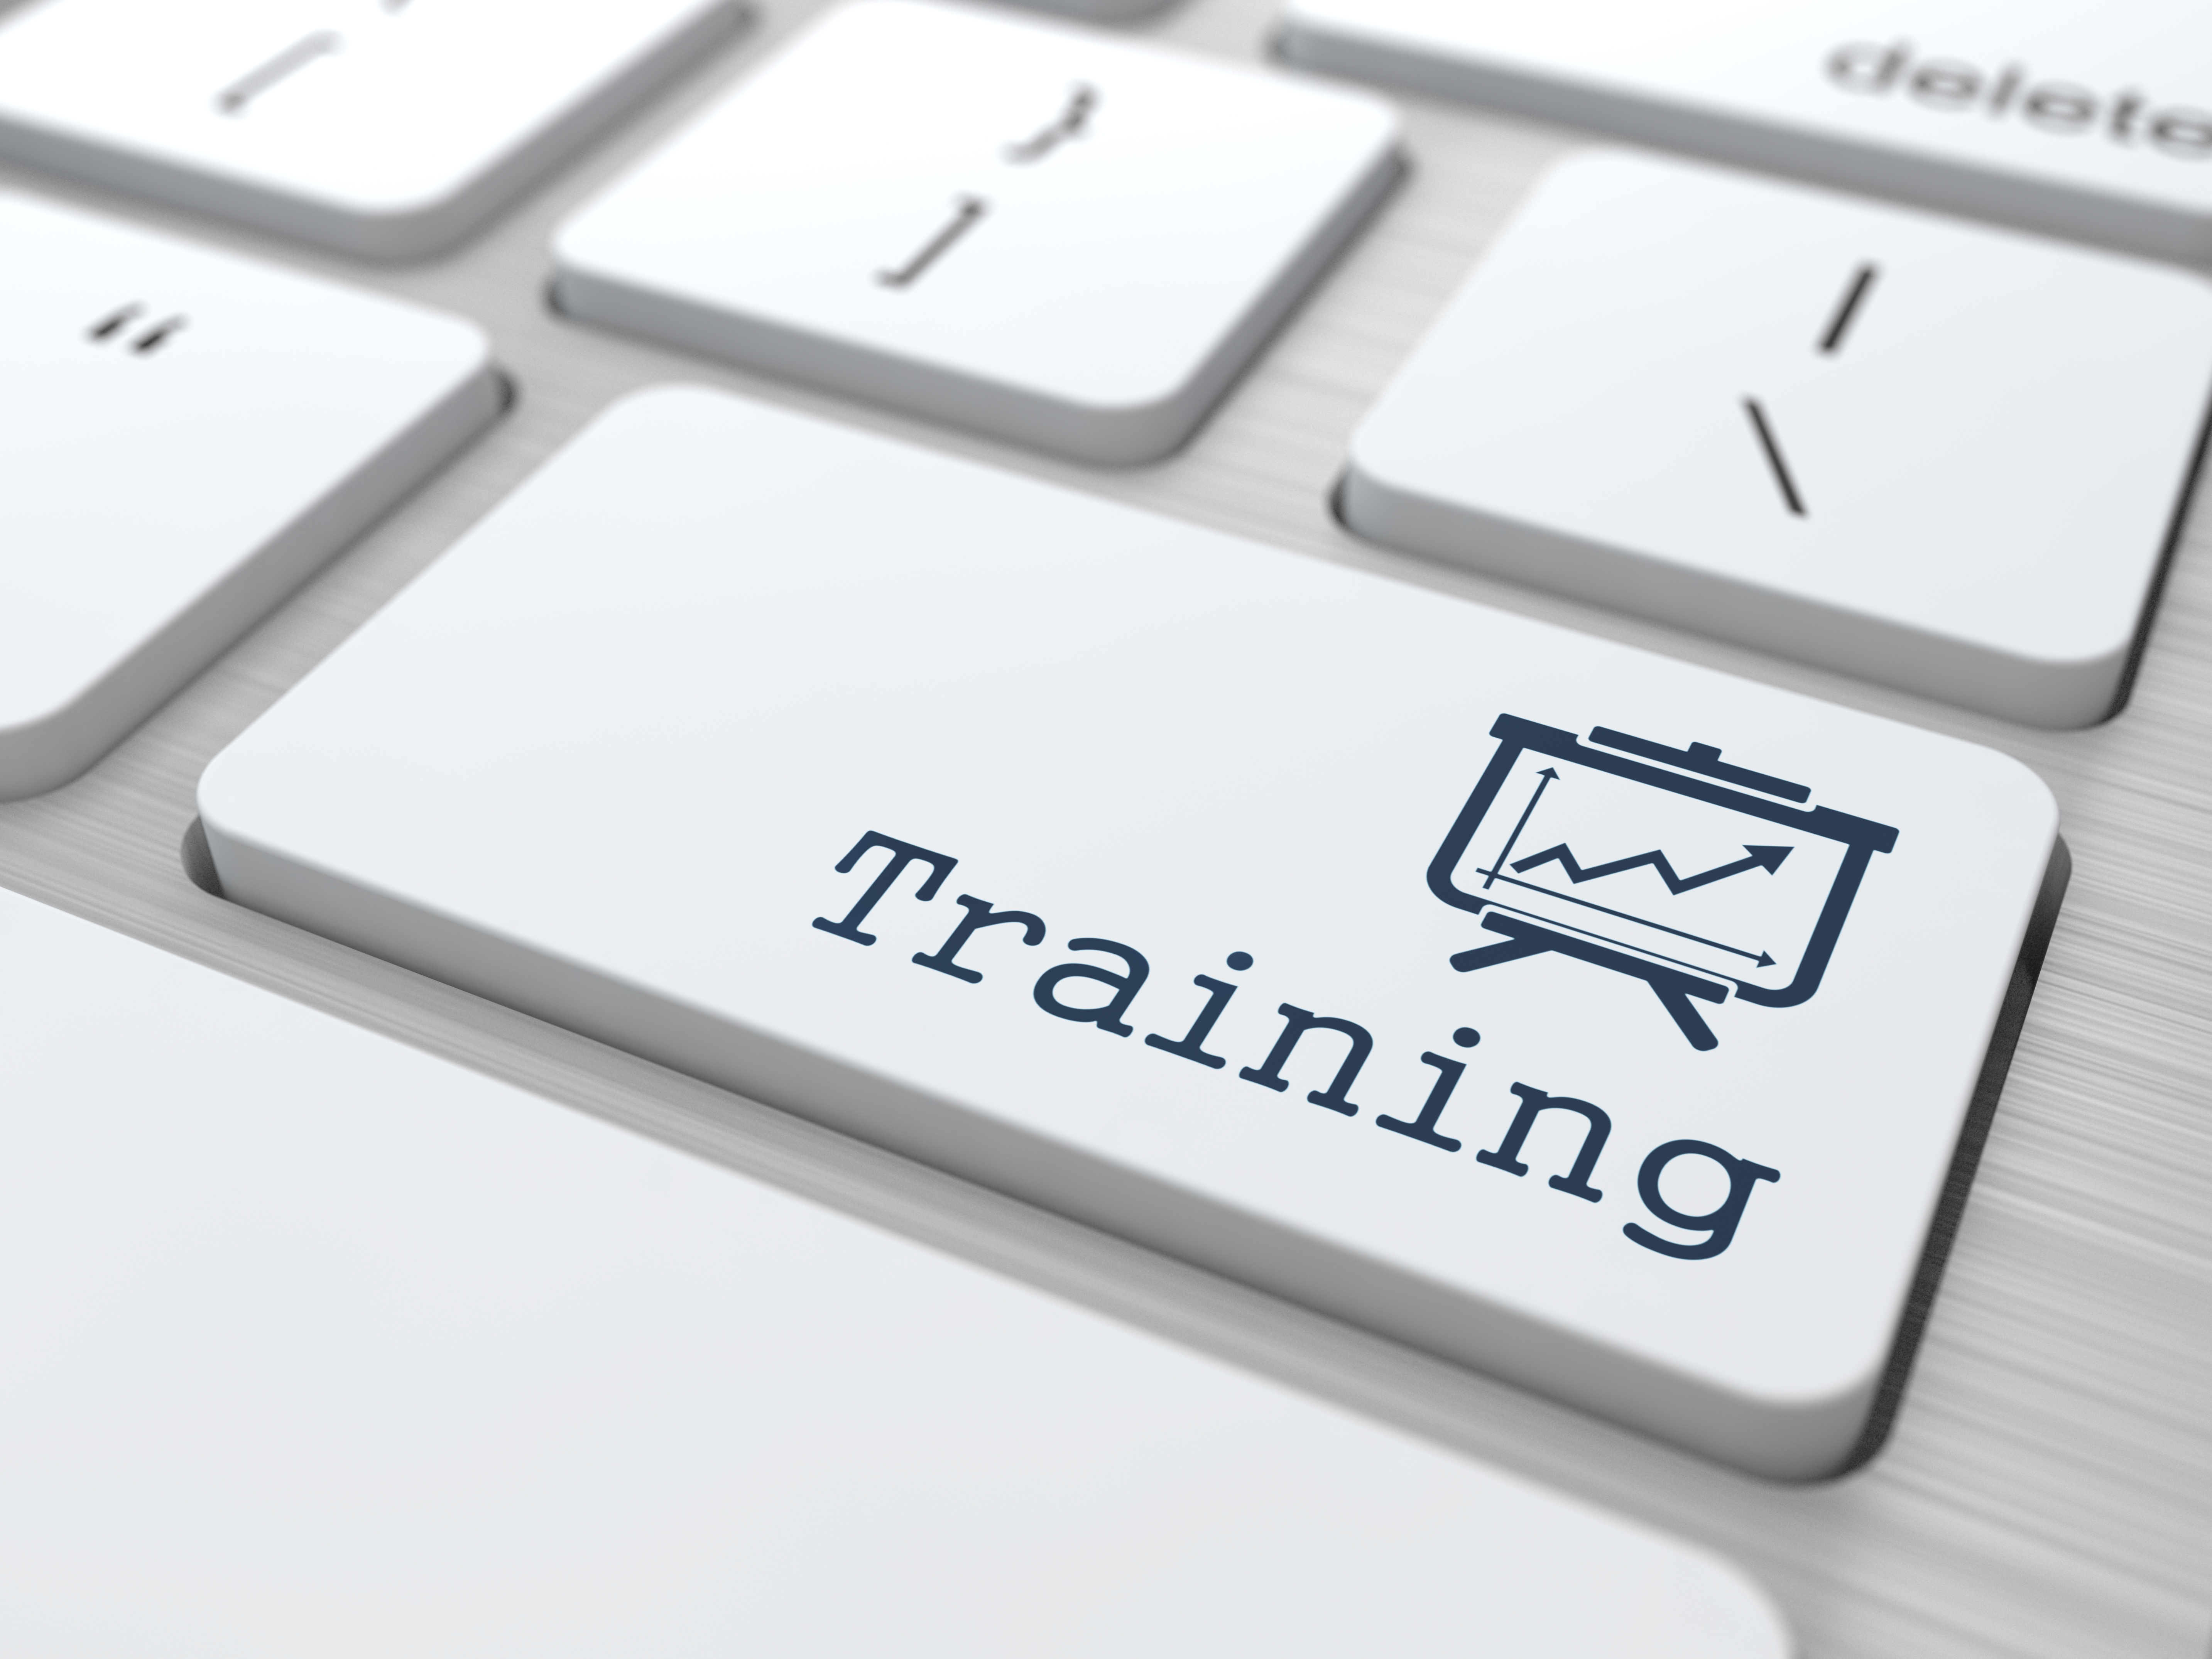 Moving Volunteer Training to E-Learning? Remember These Tips